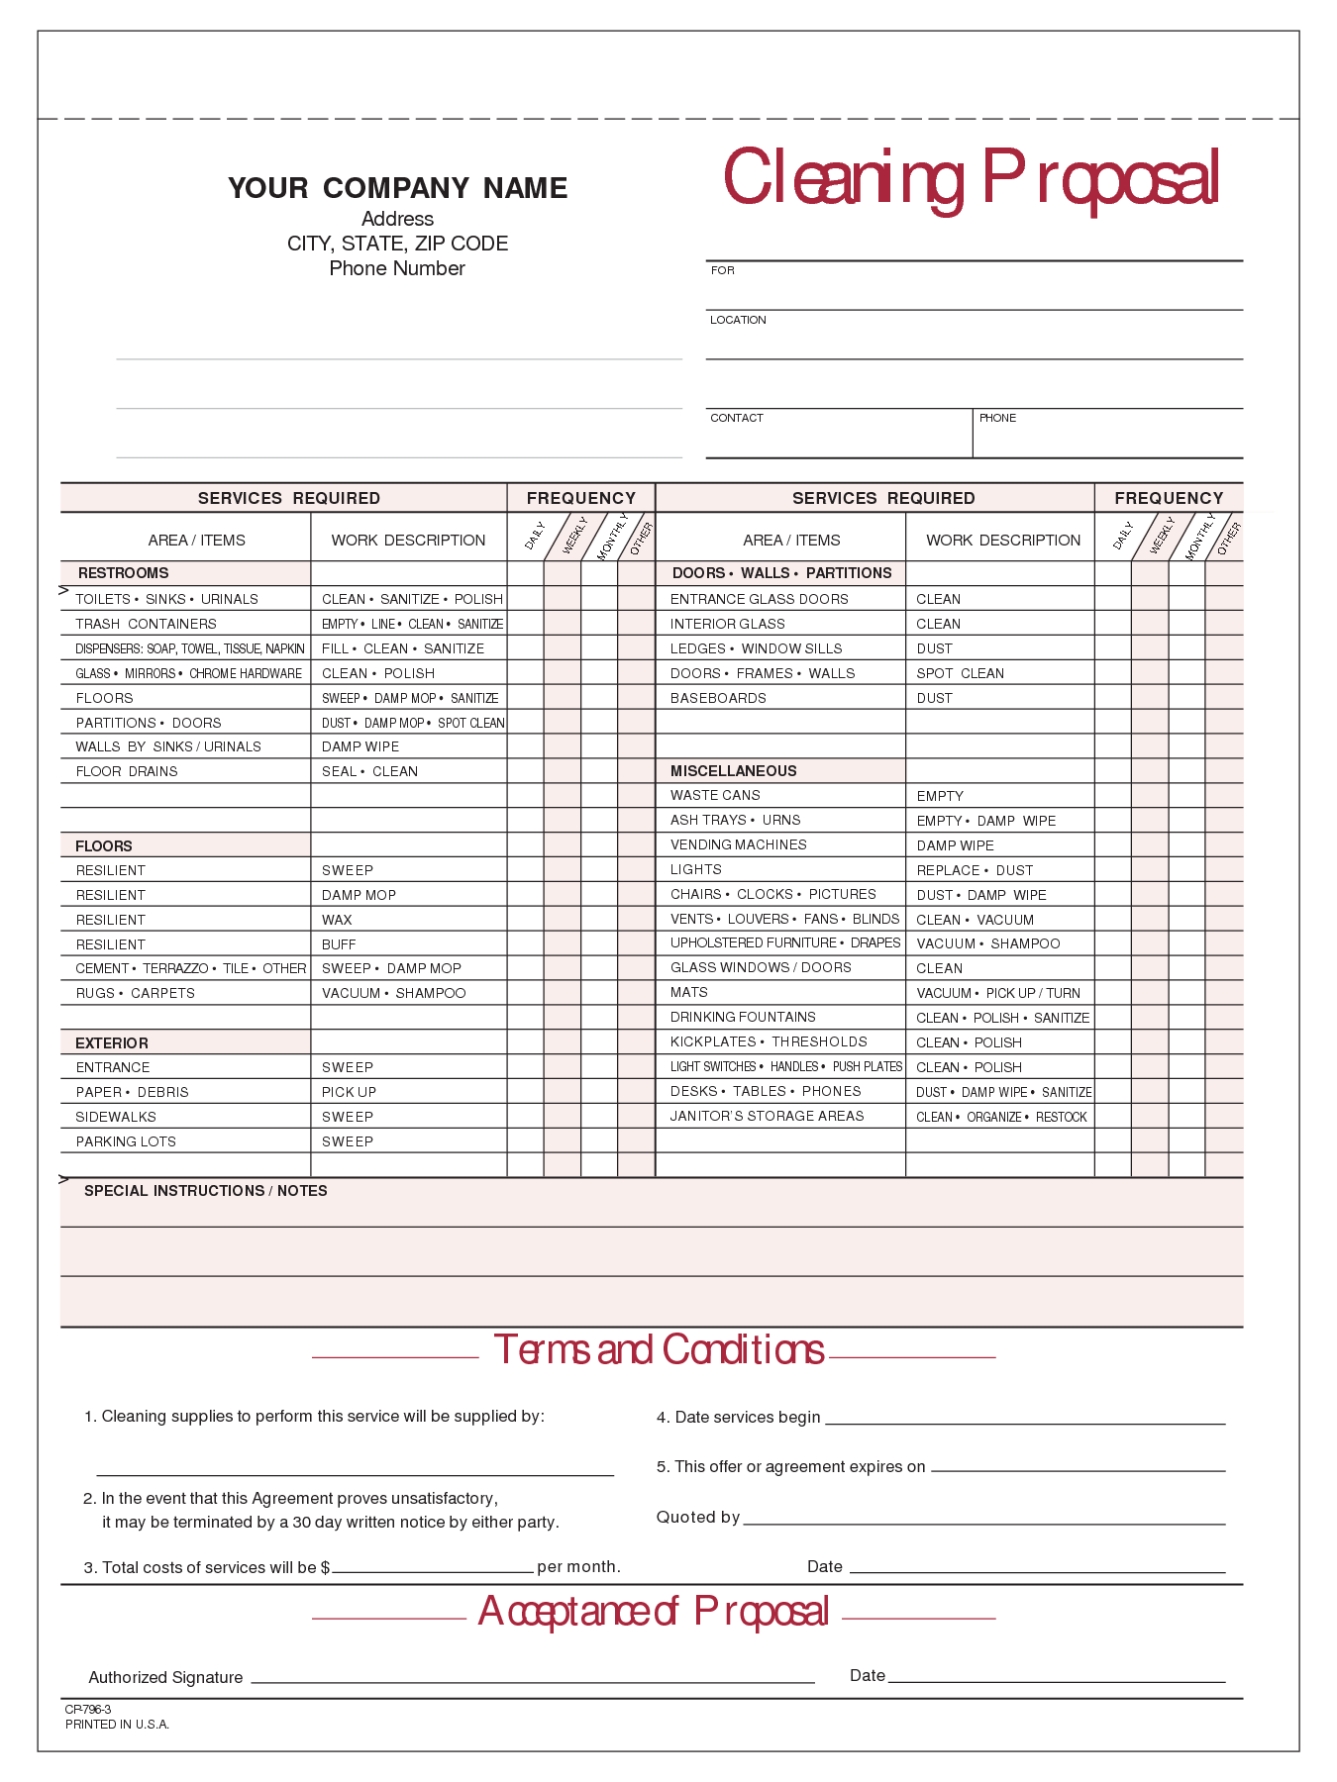 Free Cleaning Proposal - Invoice Template Inside Free Cleaning Proposal Template